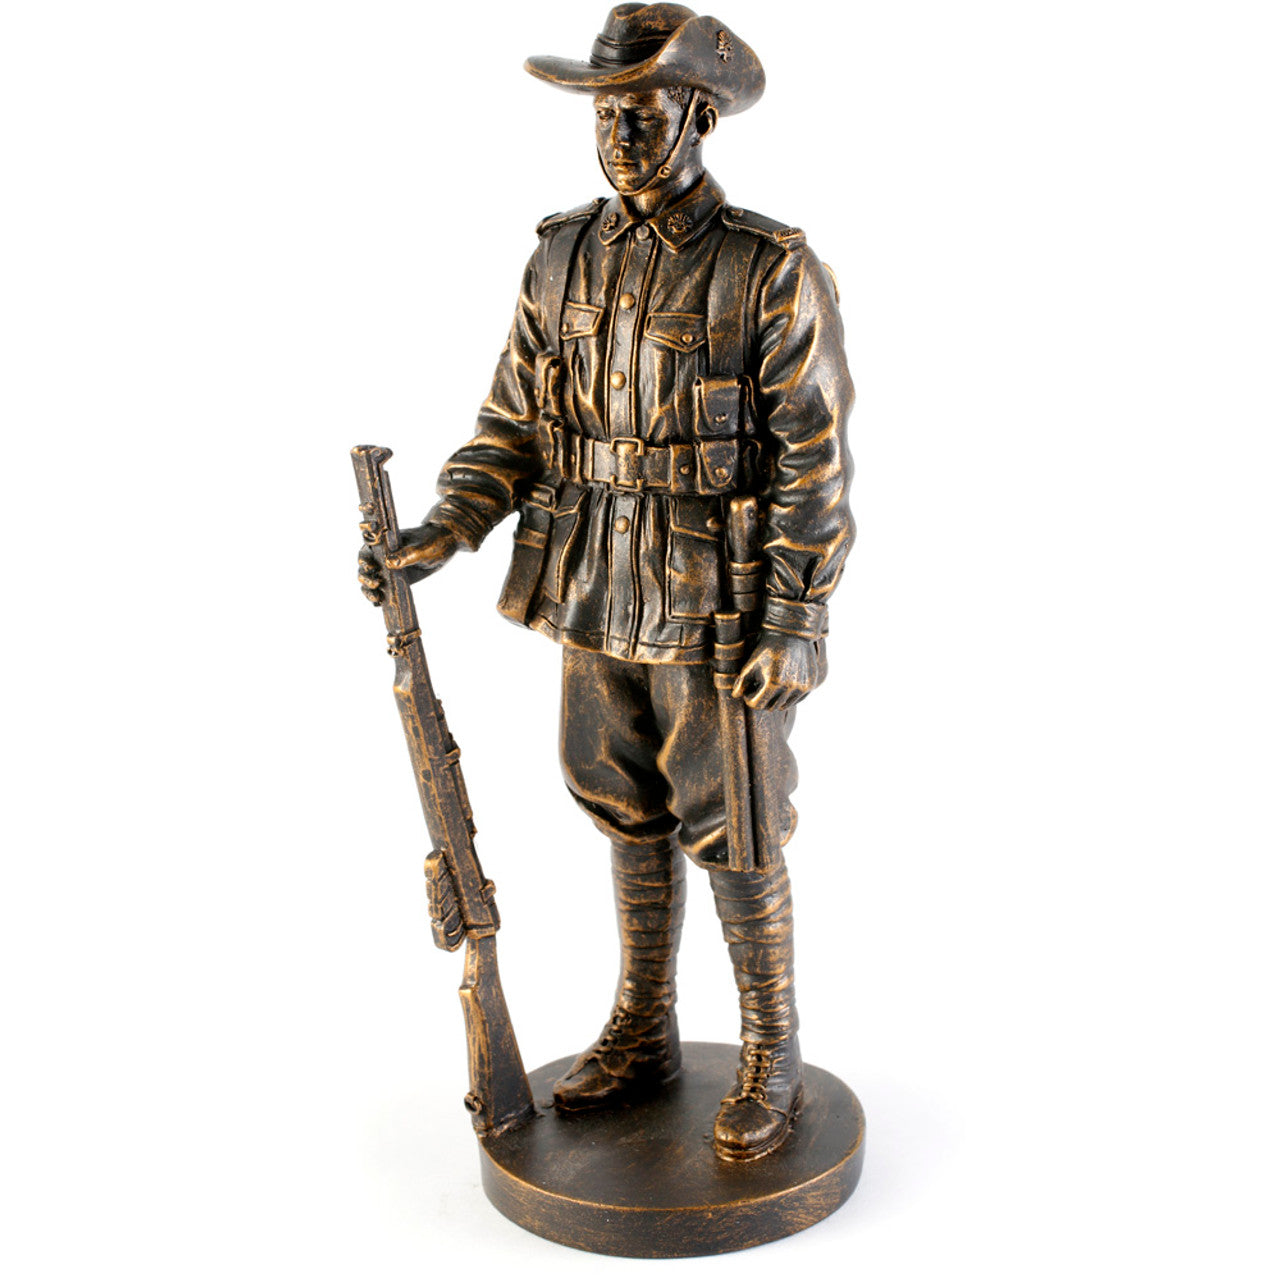 The stunning AIF Digger miniature figurine is a tangible representation of the Anzac Spirit. The figurine is approximately 200mm high with a 70mm round base. www.defenceqstore.com.au